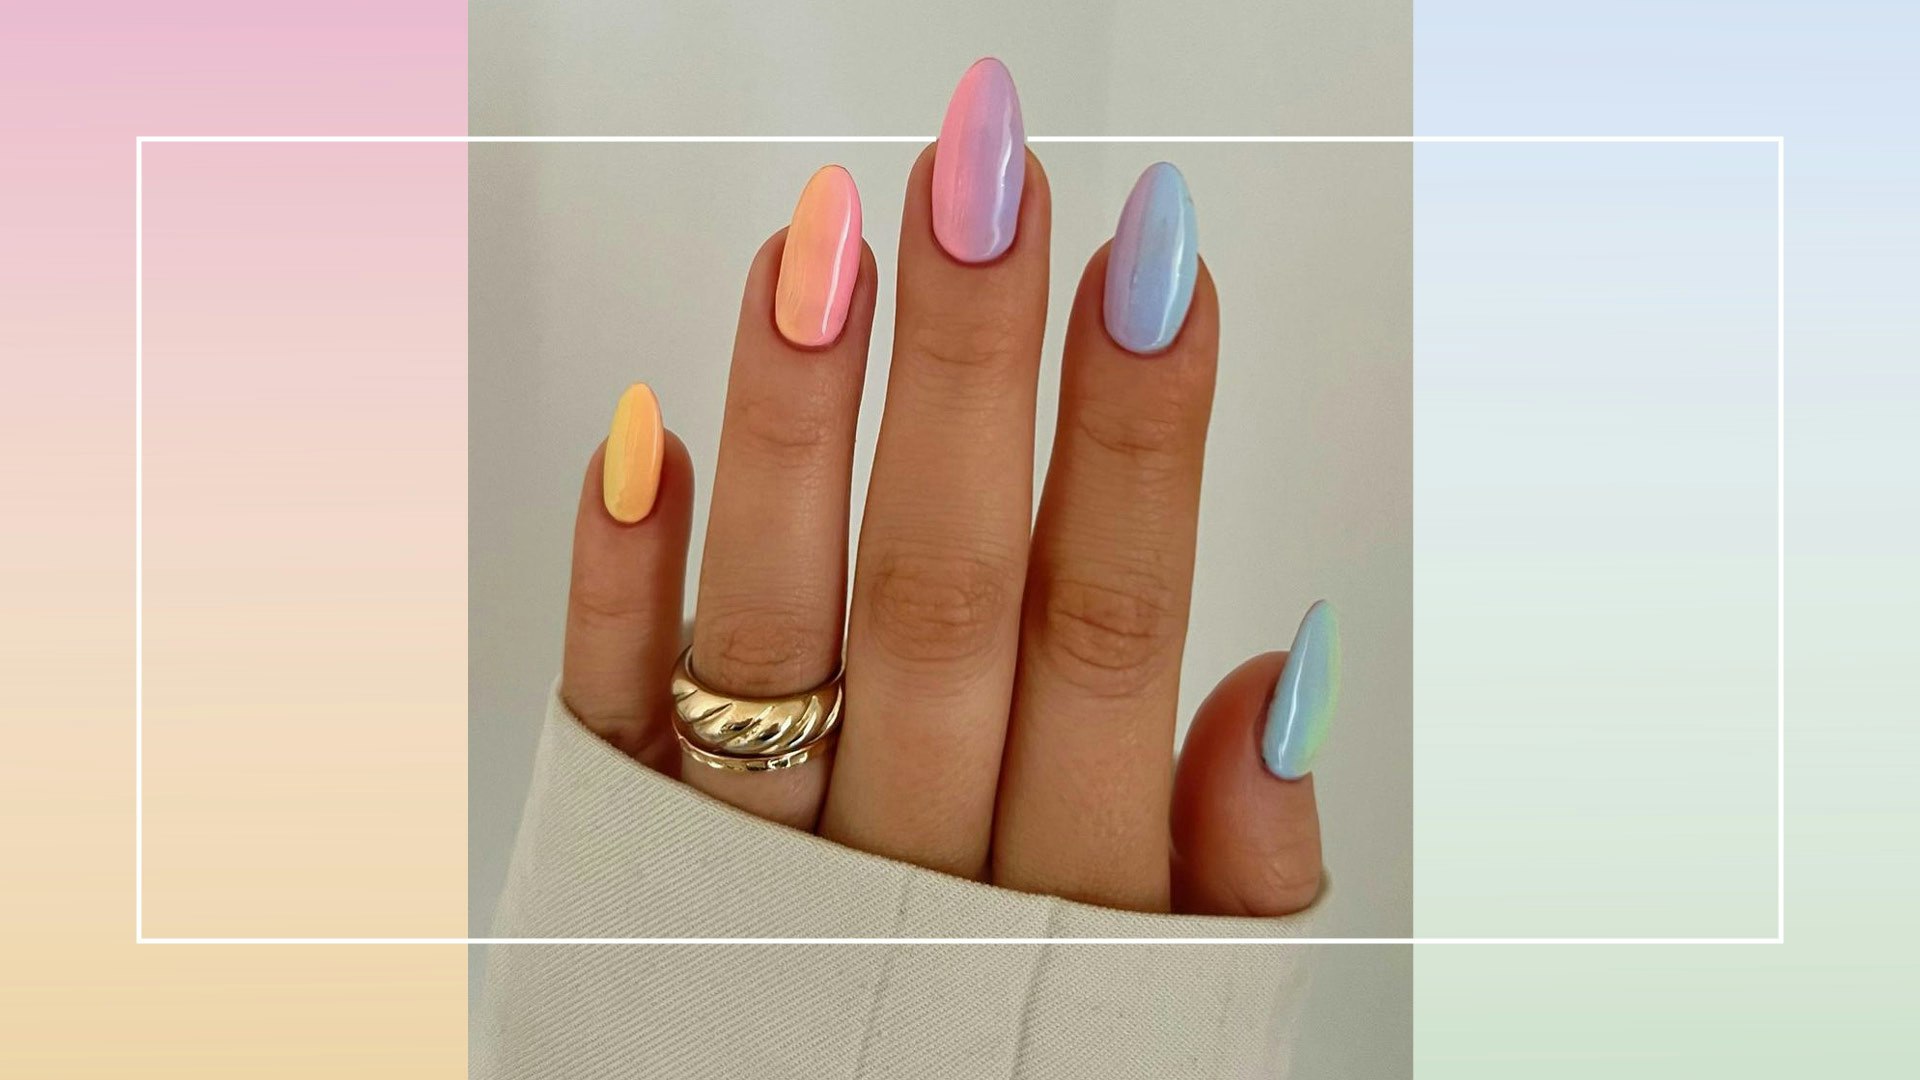 2. "10 Trendy Almond Shape Nail Colors to Try This Season" - wide 5